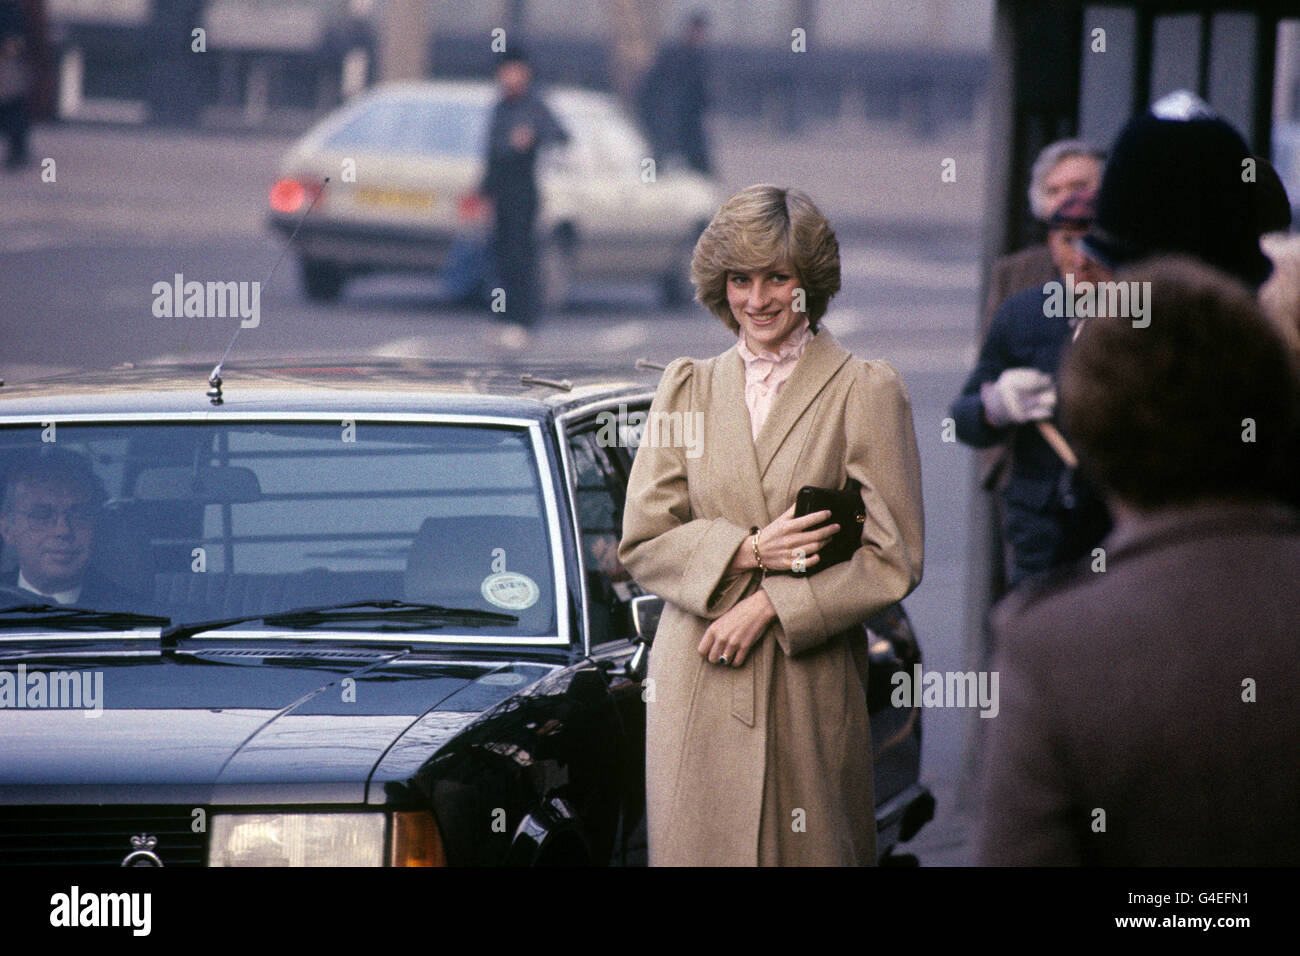 The Princess of Wales visiting the Department of Health and Social Security in Elephant and Castle, London. Stock Photo